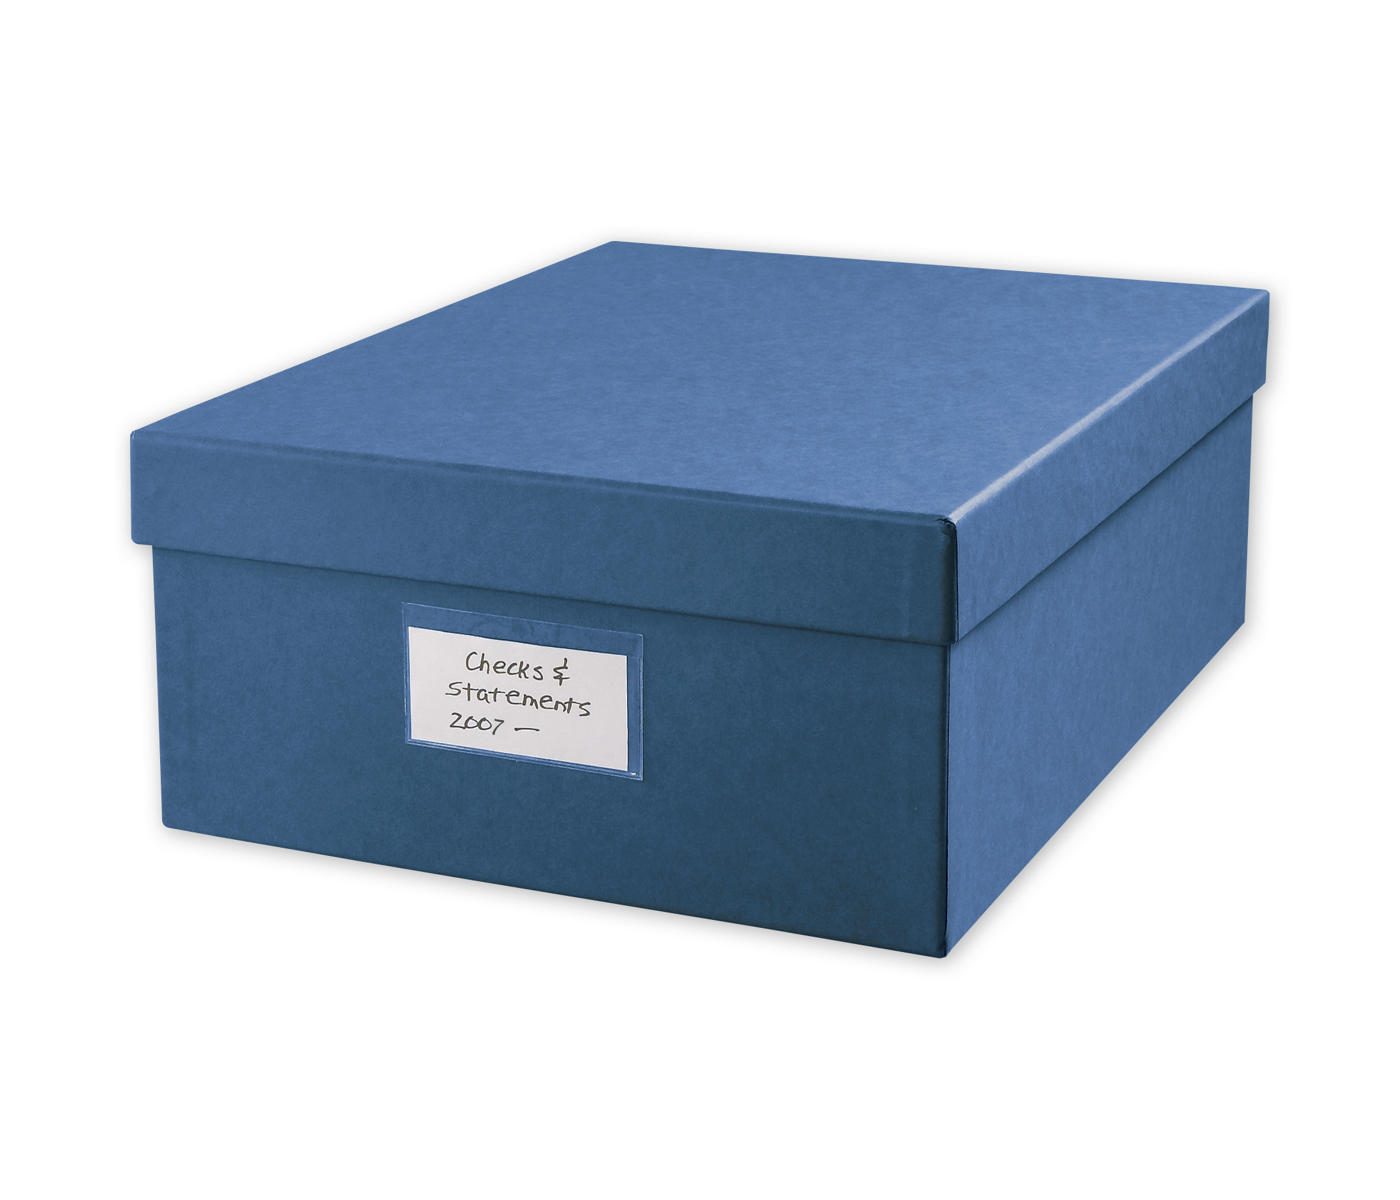 Large 12 x 9 3/4" Cancelled Check Storage Box